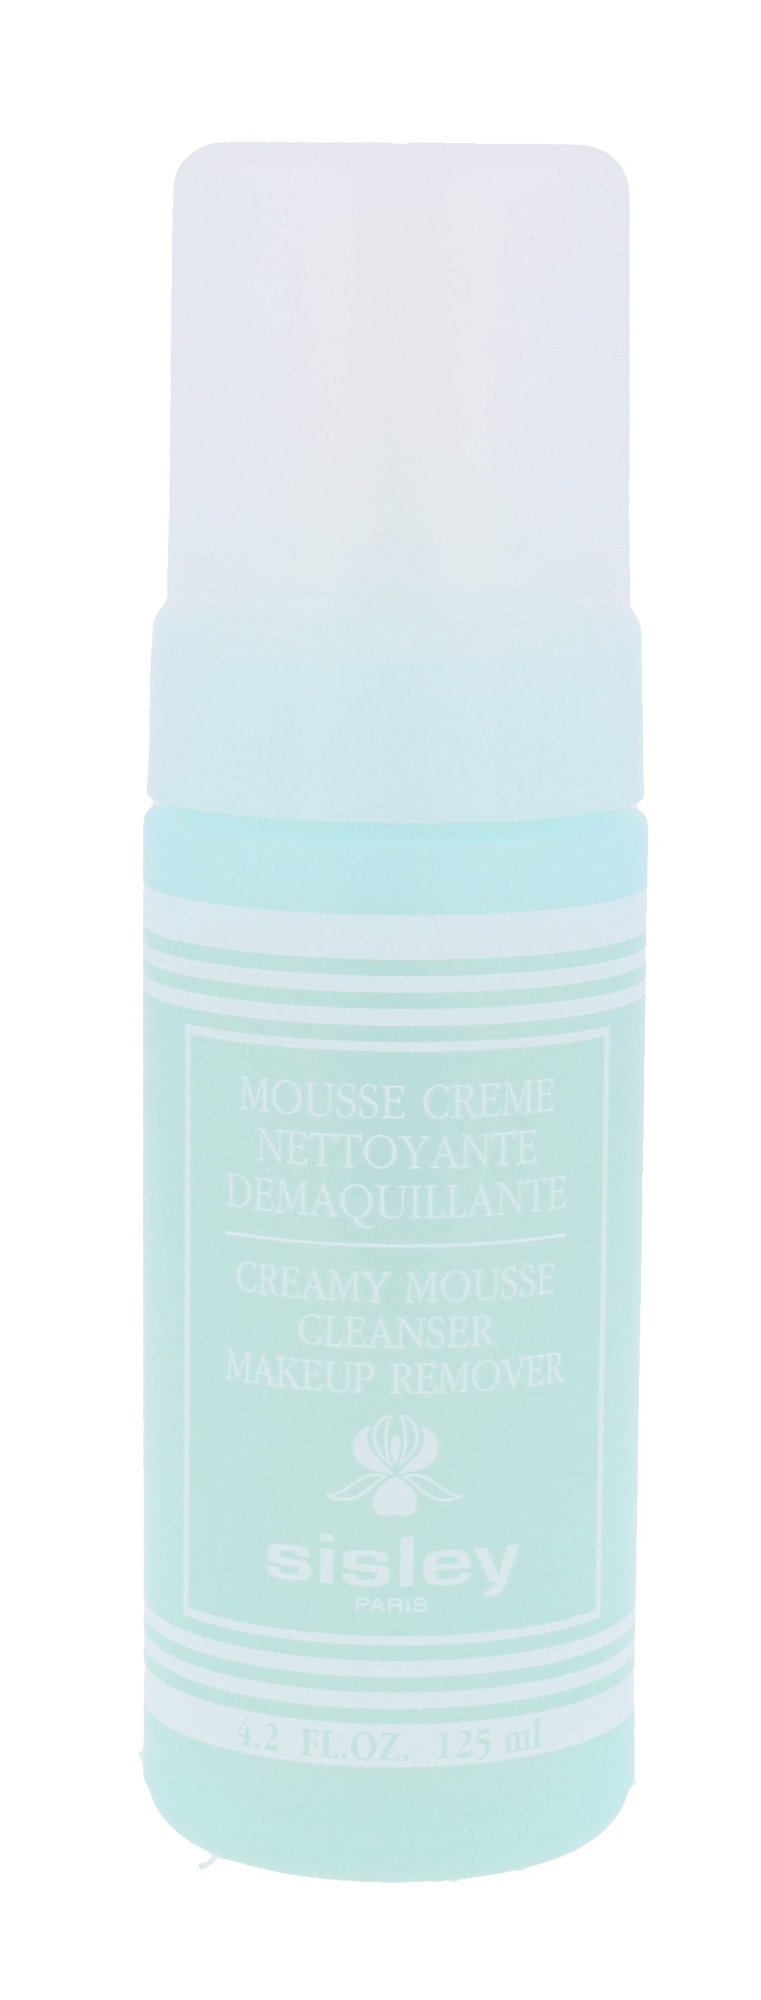 Sisley Creamy Mousse Cleanser